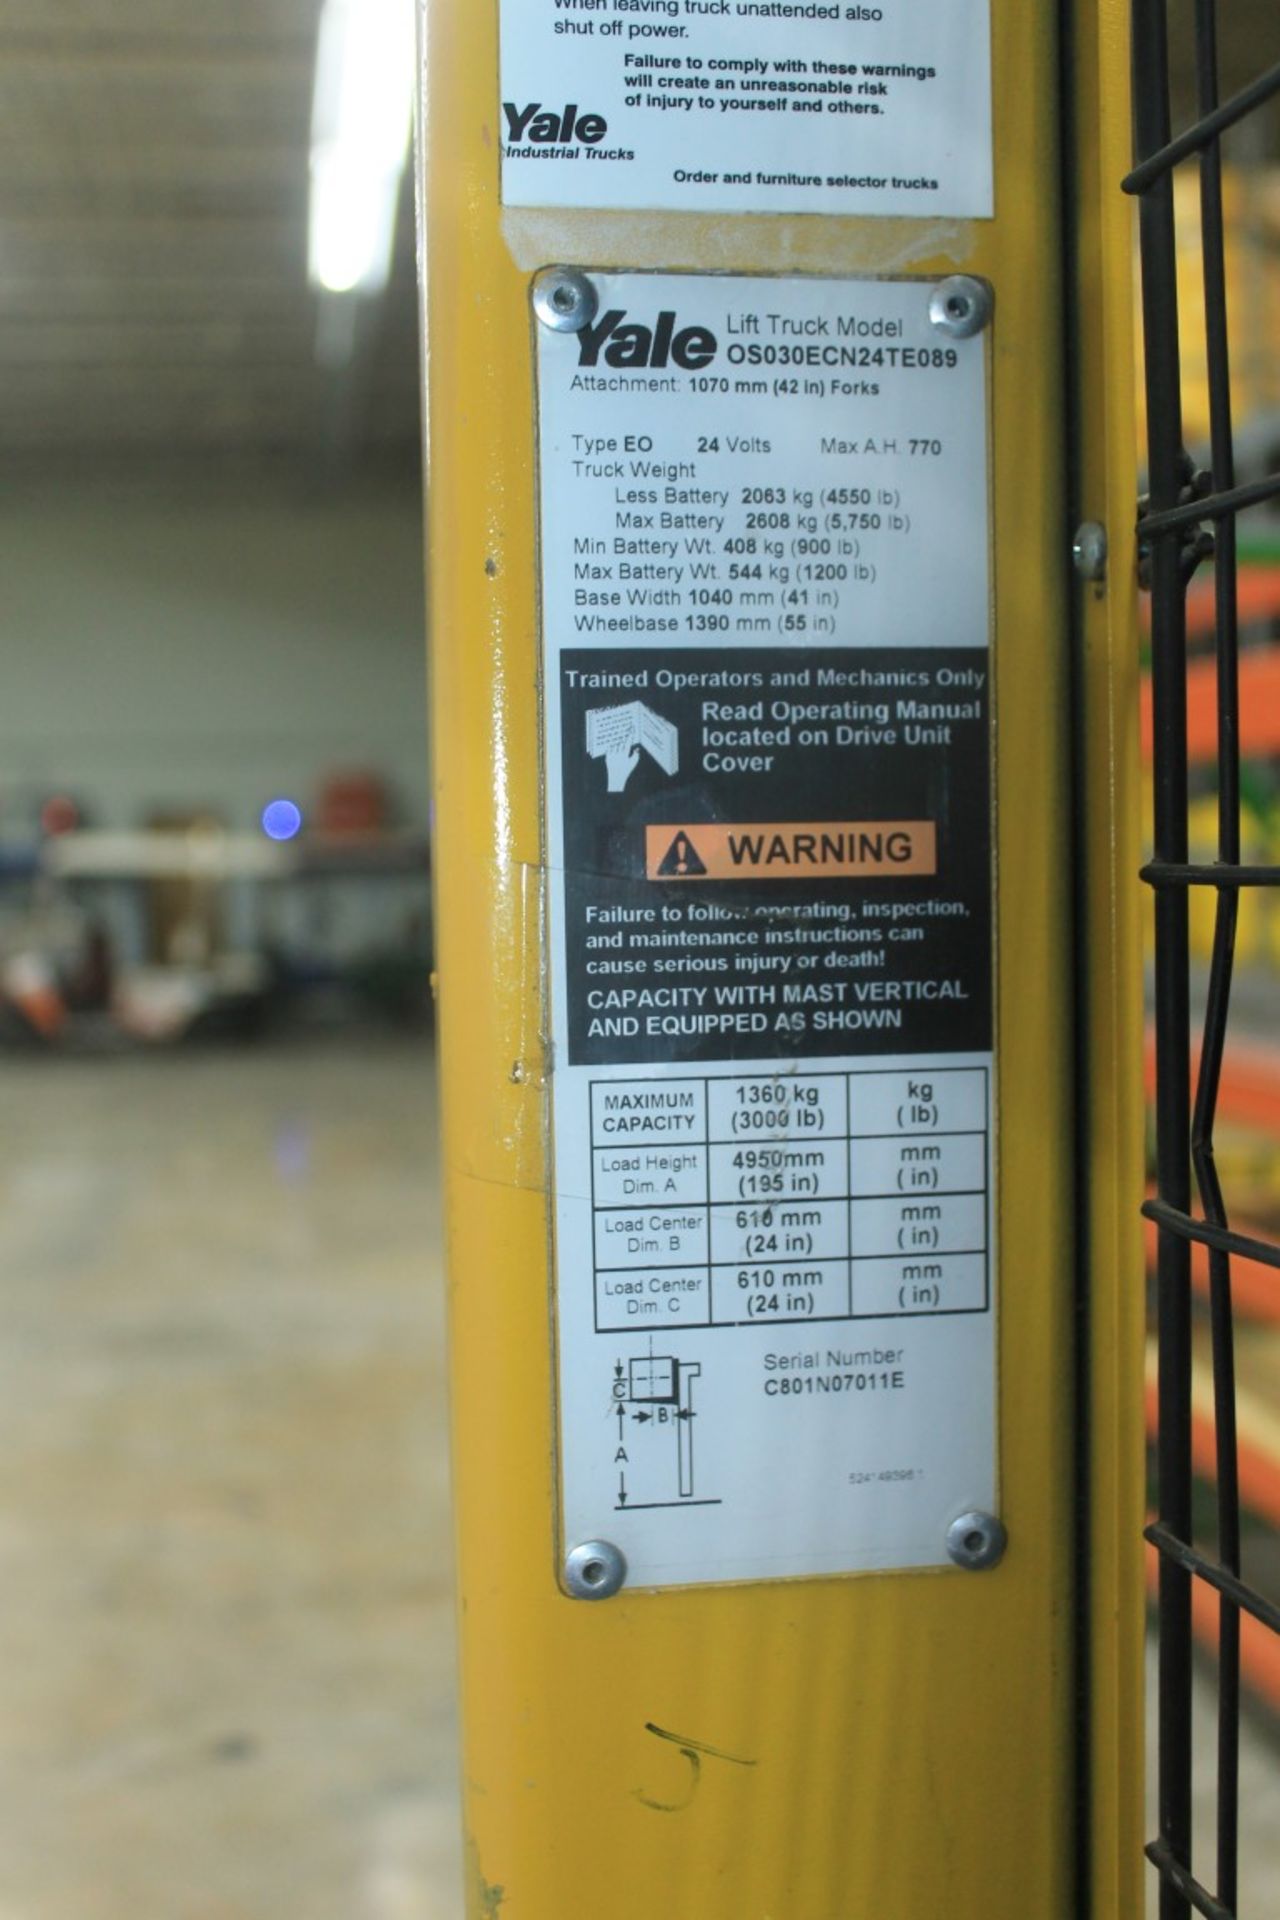 2007 YALE 3000 LBS. CAP ORDER PICKER/FORKLIFT, (WATCH VIDEO) - Image 4 of 6